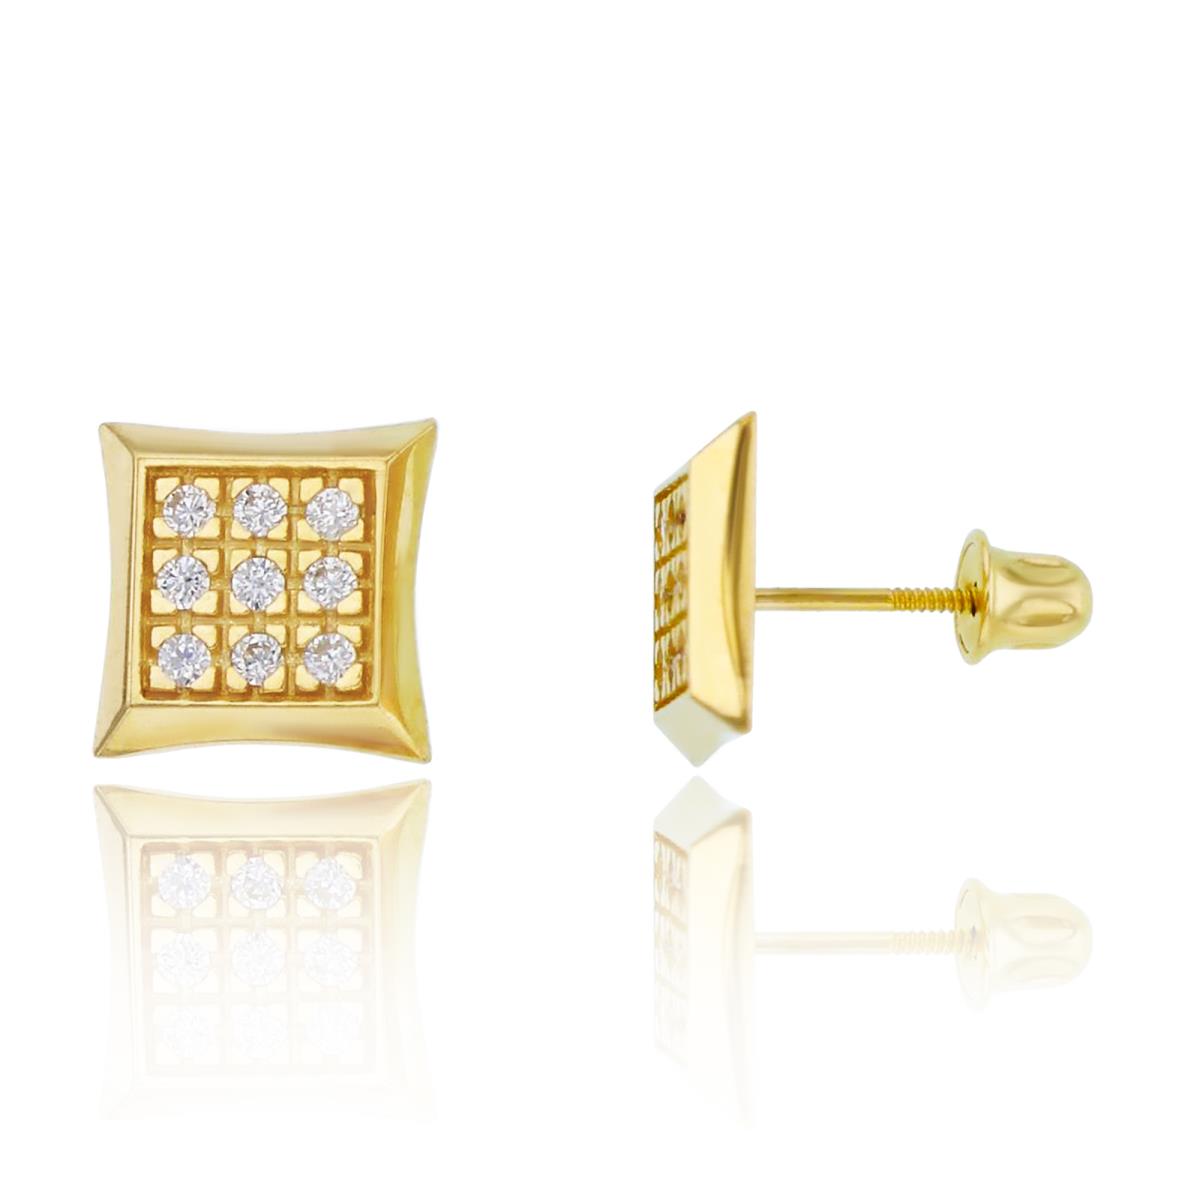 14K Yellow Gold 8mm Paved Square Screwback Stud Earring